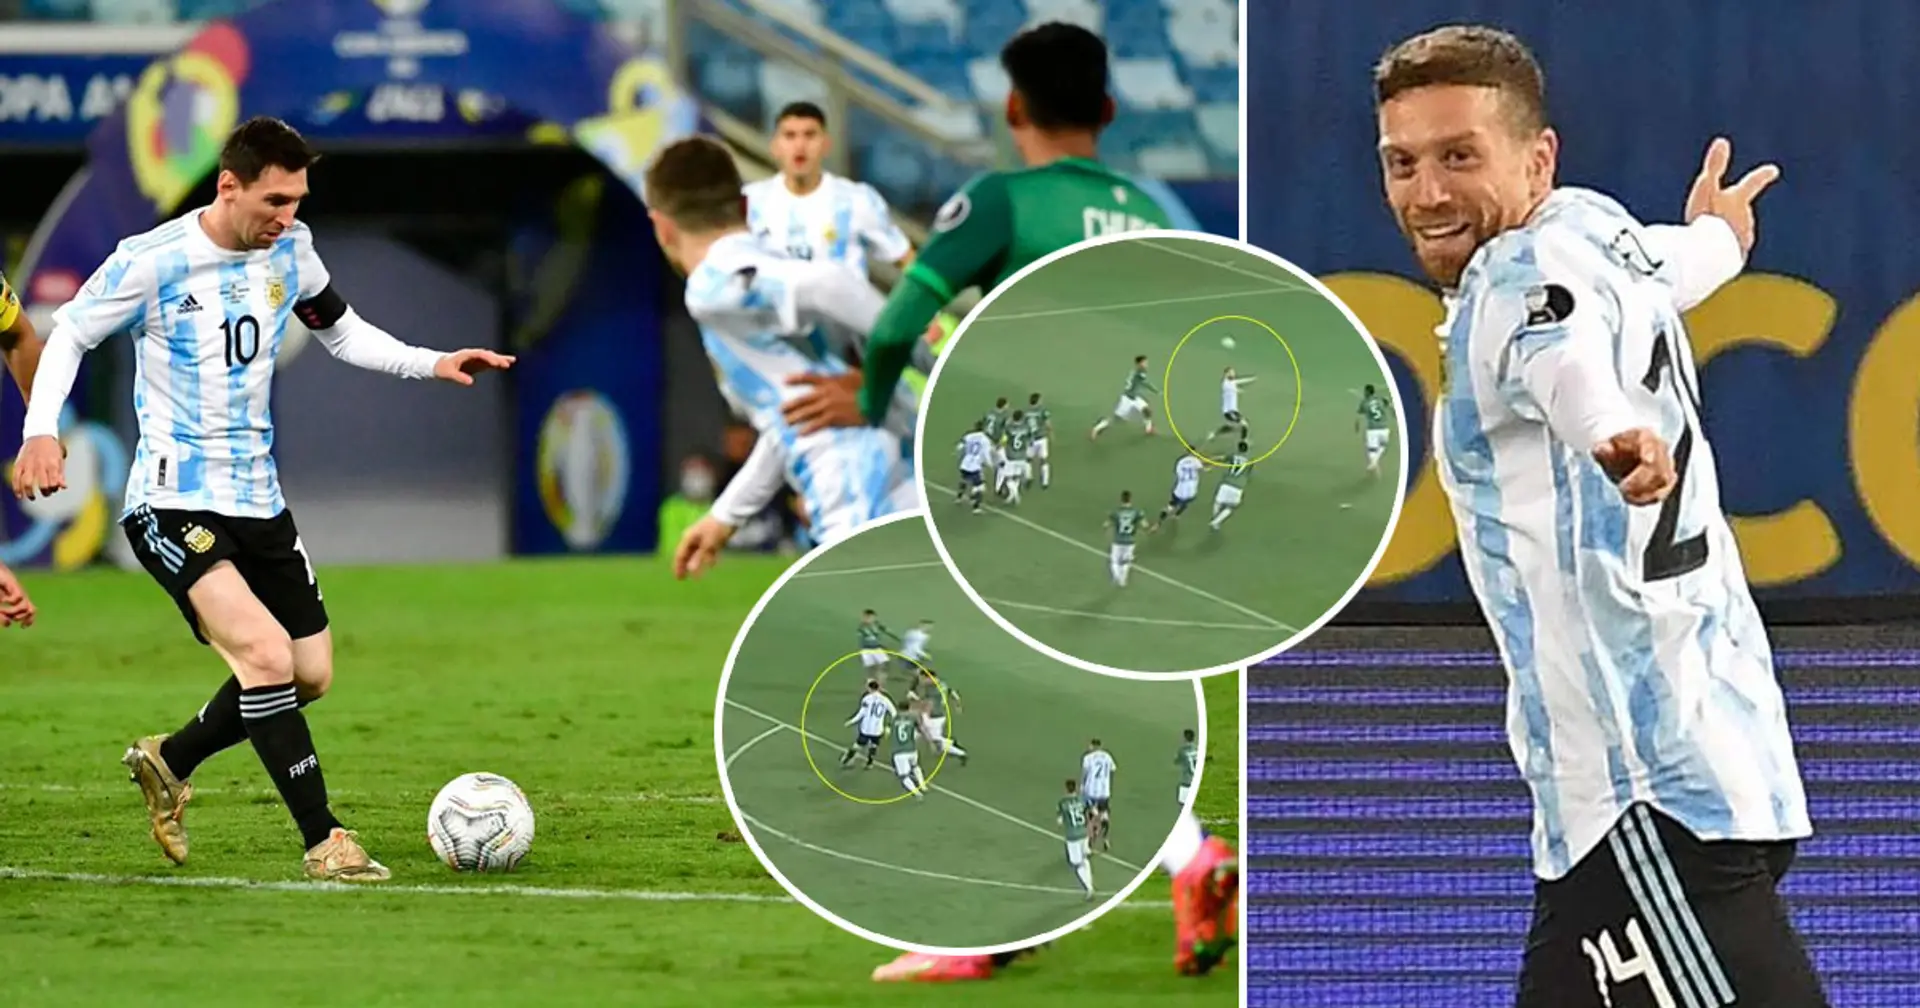 Messi sends whole Bolivia defence packing with marvelous assist to Papu Gomez: illustrated in 5 pics